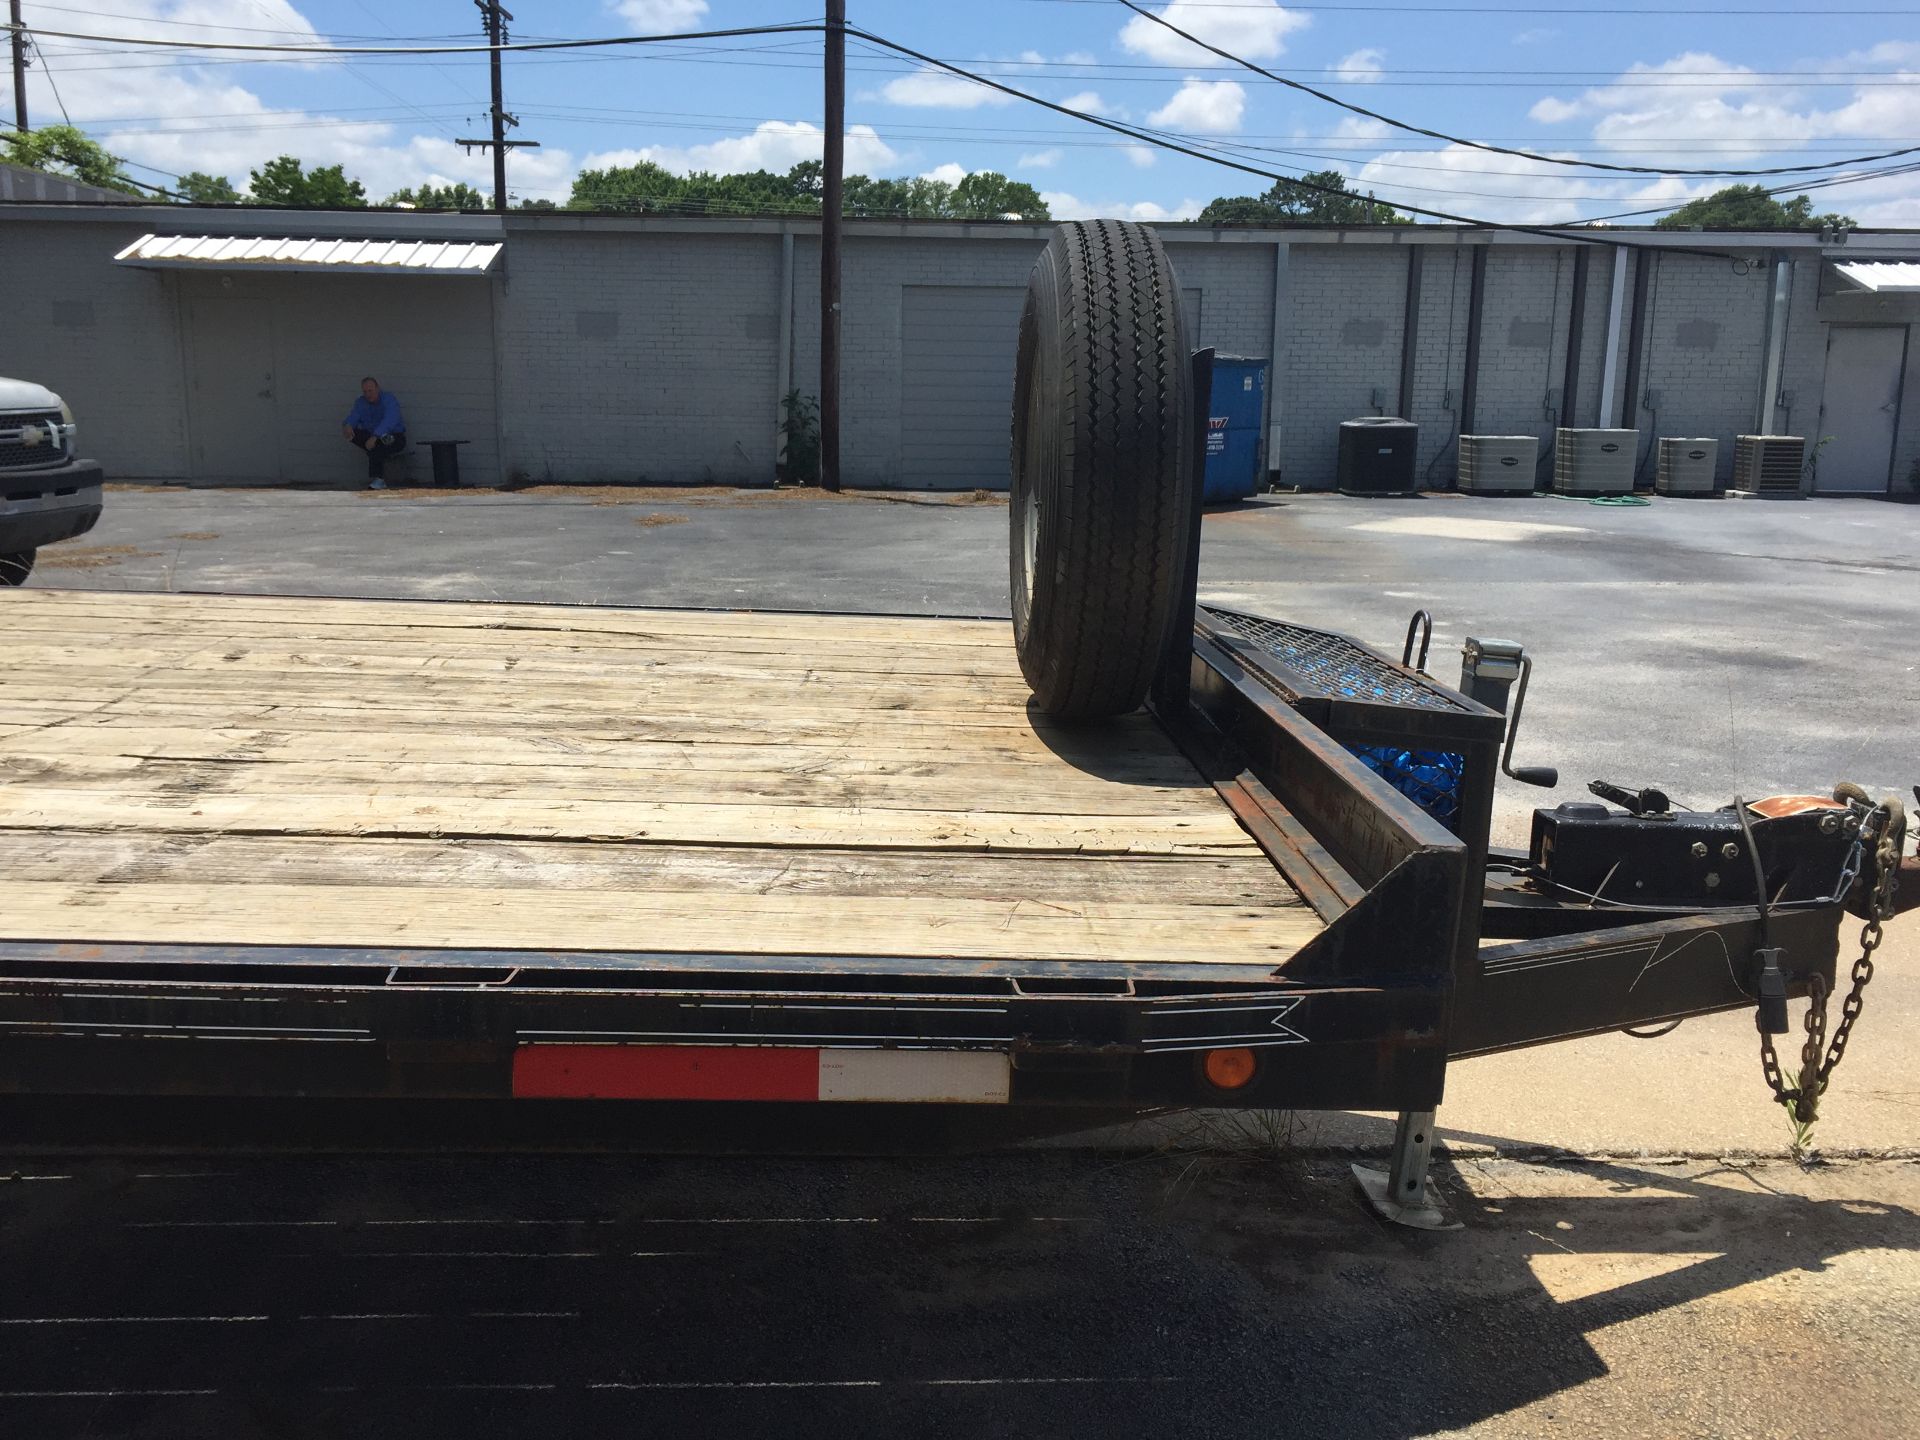 FLATBED TRAILER, new 2007, Â 20'L, 2,800 lb. empty weight, 11,200 carrying capacity - Image 3 of 4